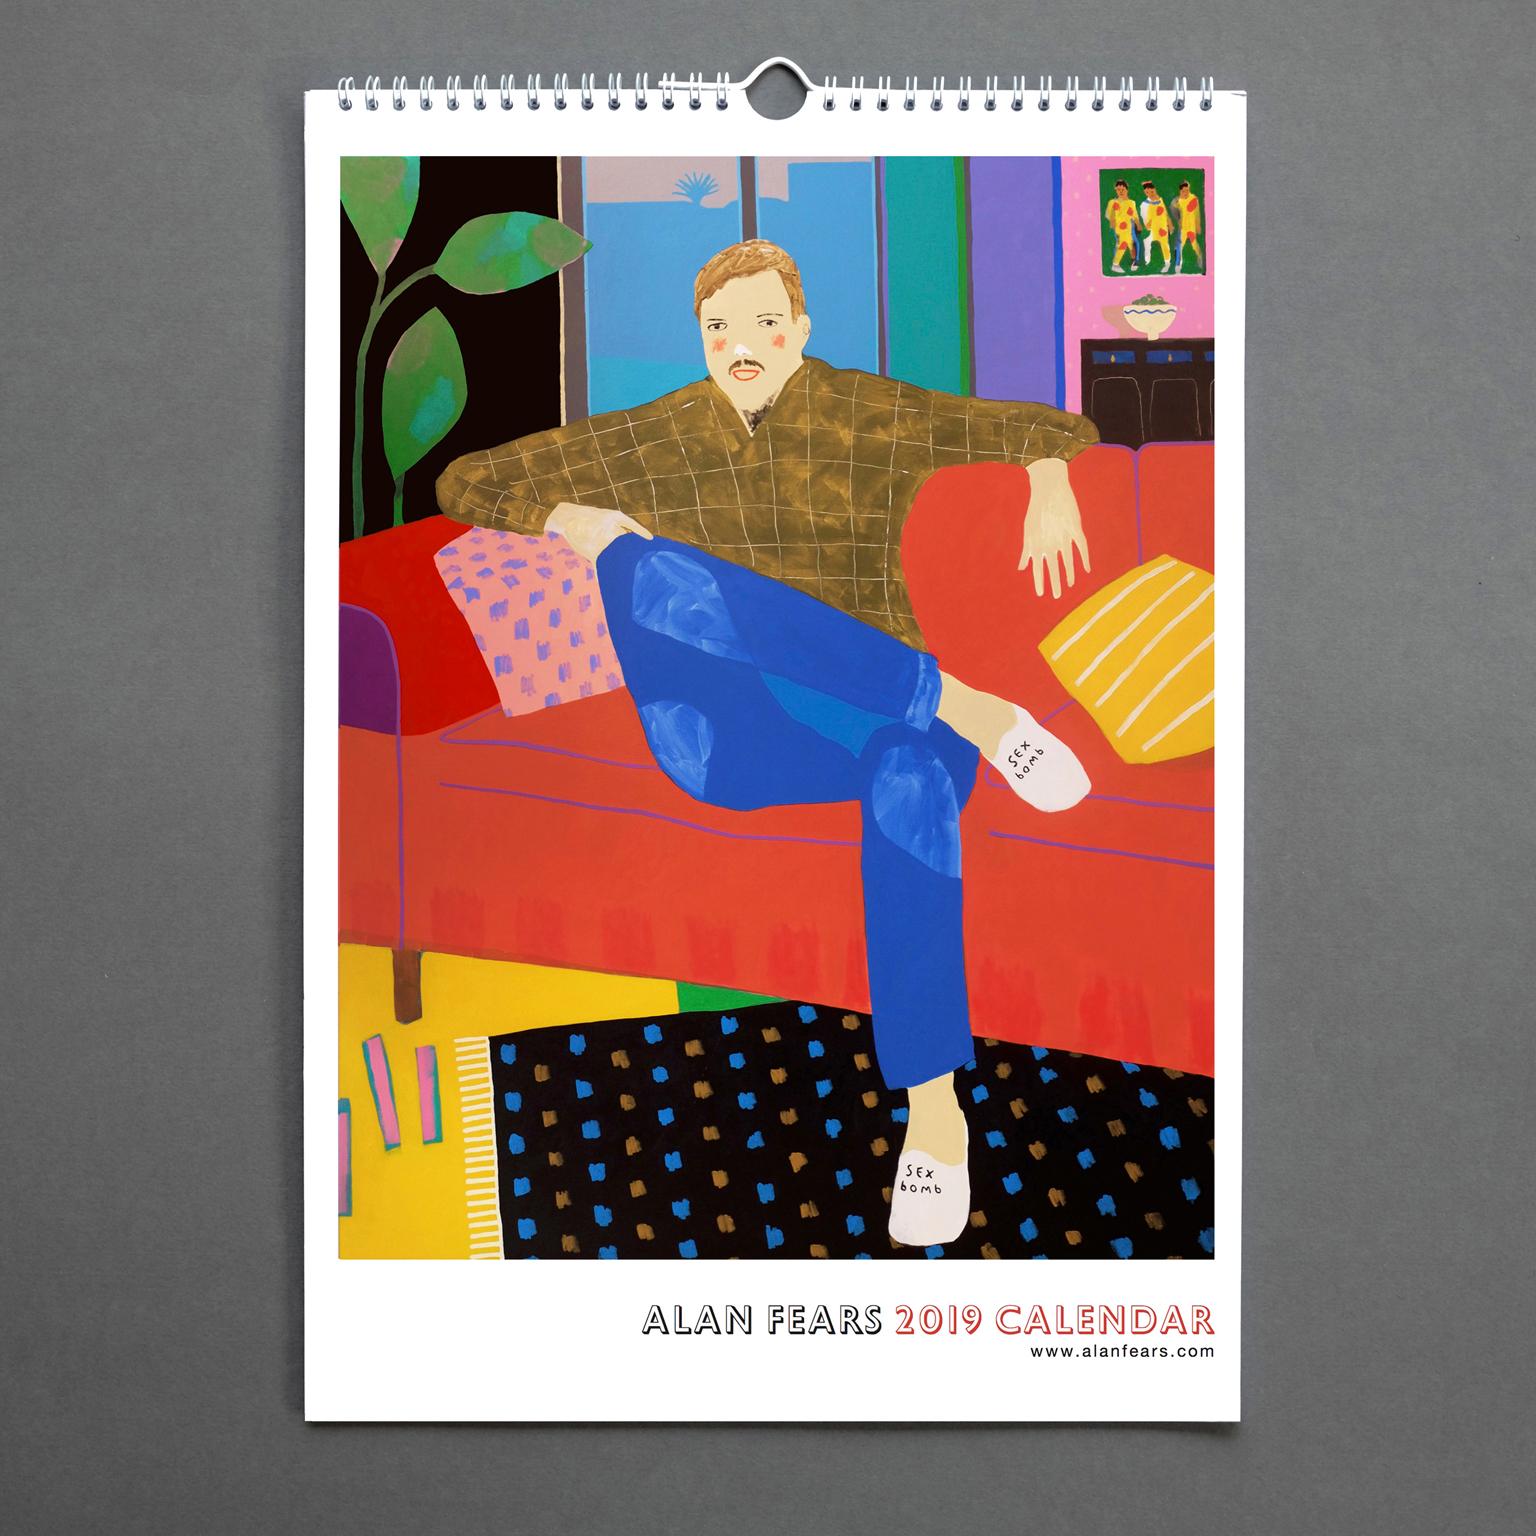 A3 ringbinder calendar with 12 pages printed on 160gsm satin paper.

The calendar features 12 of Alan’s most recent paintings, including Playing with Roland, Boyfriend Material and Weekend Socks, in his usual vibrant and humorous style.

Alan